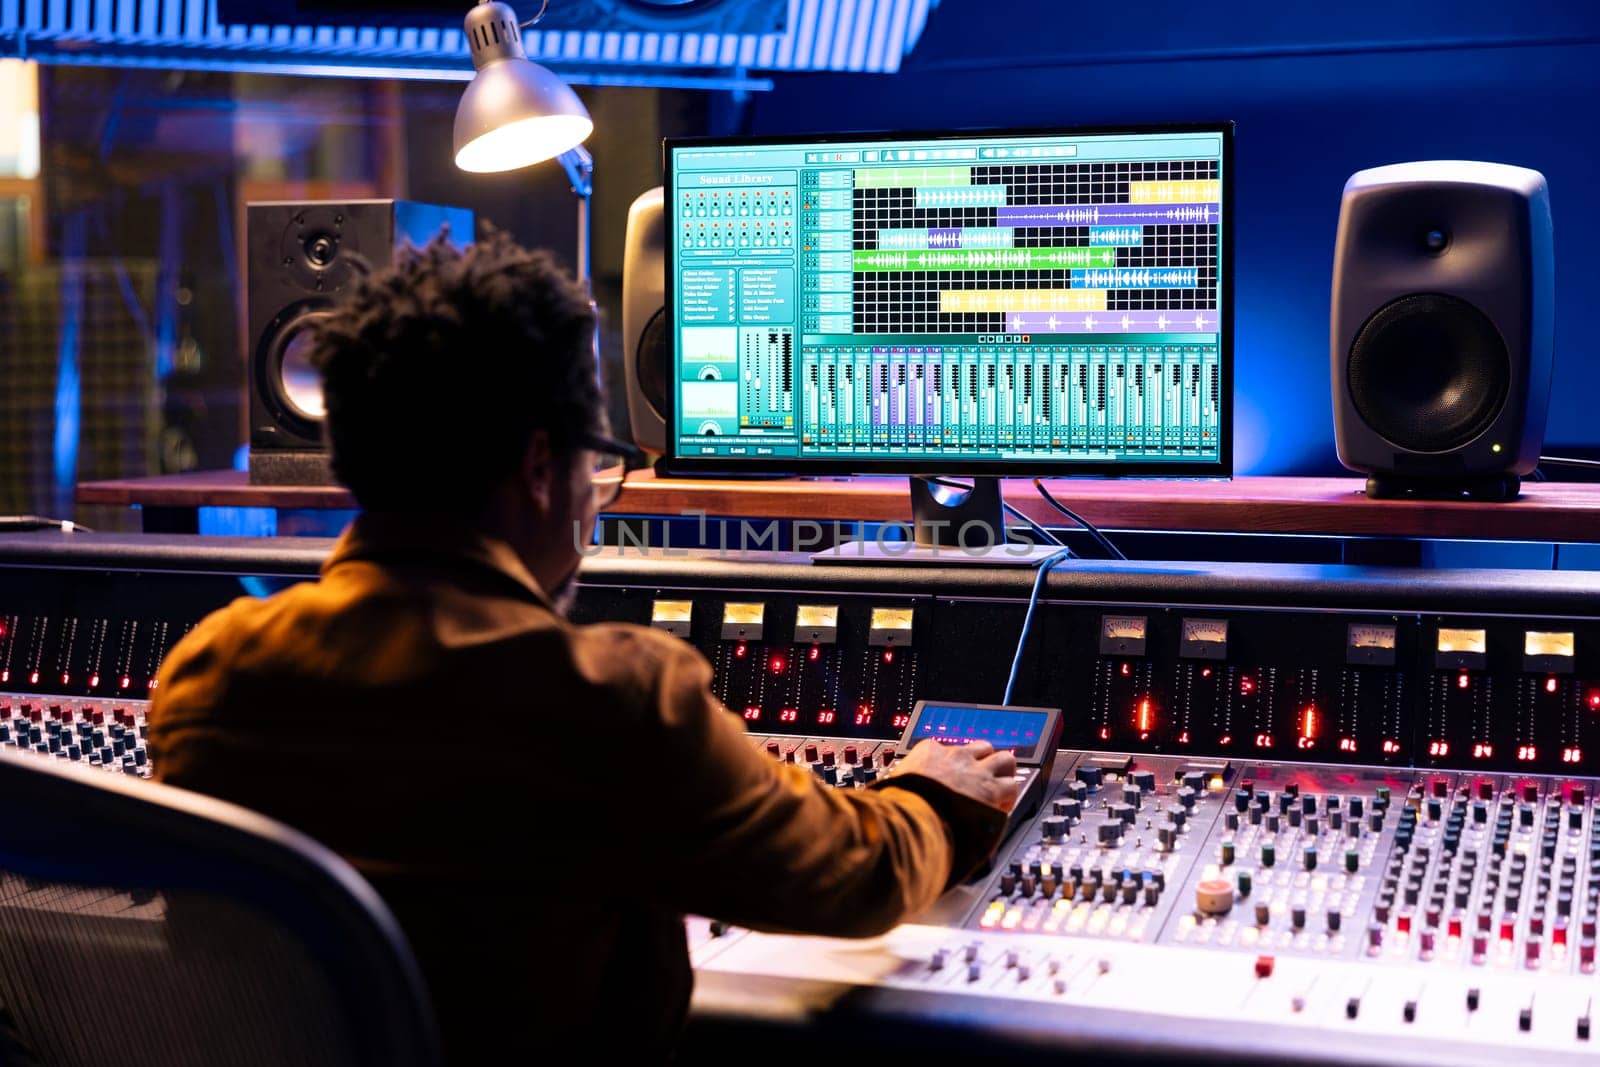 African american audio expert operating editing software to adjust sound settings, control room with mixing console in studio. Professional technician creating new tracks for an album.